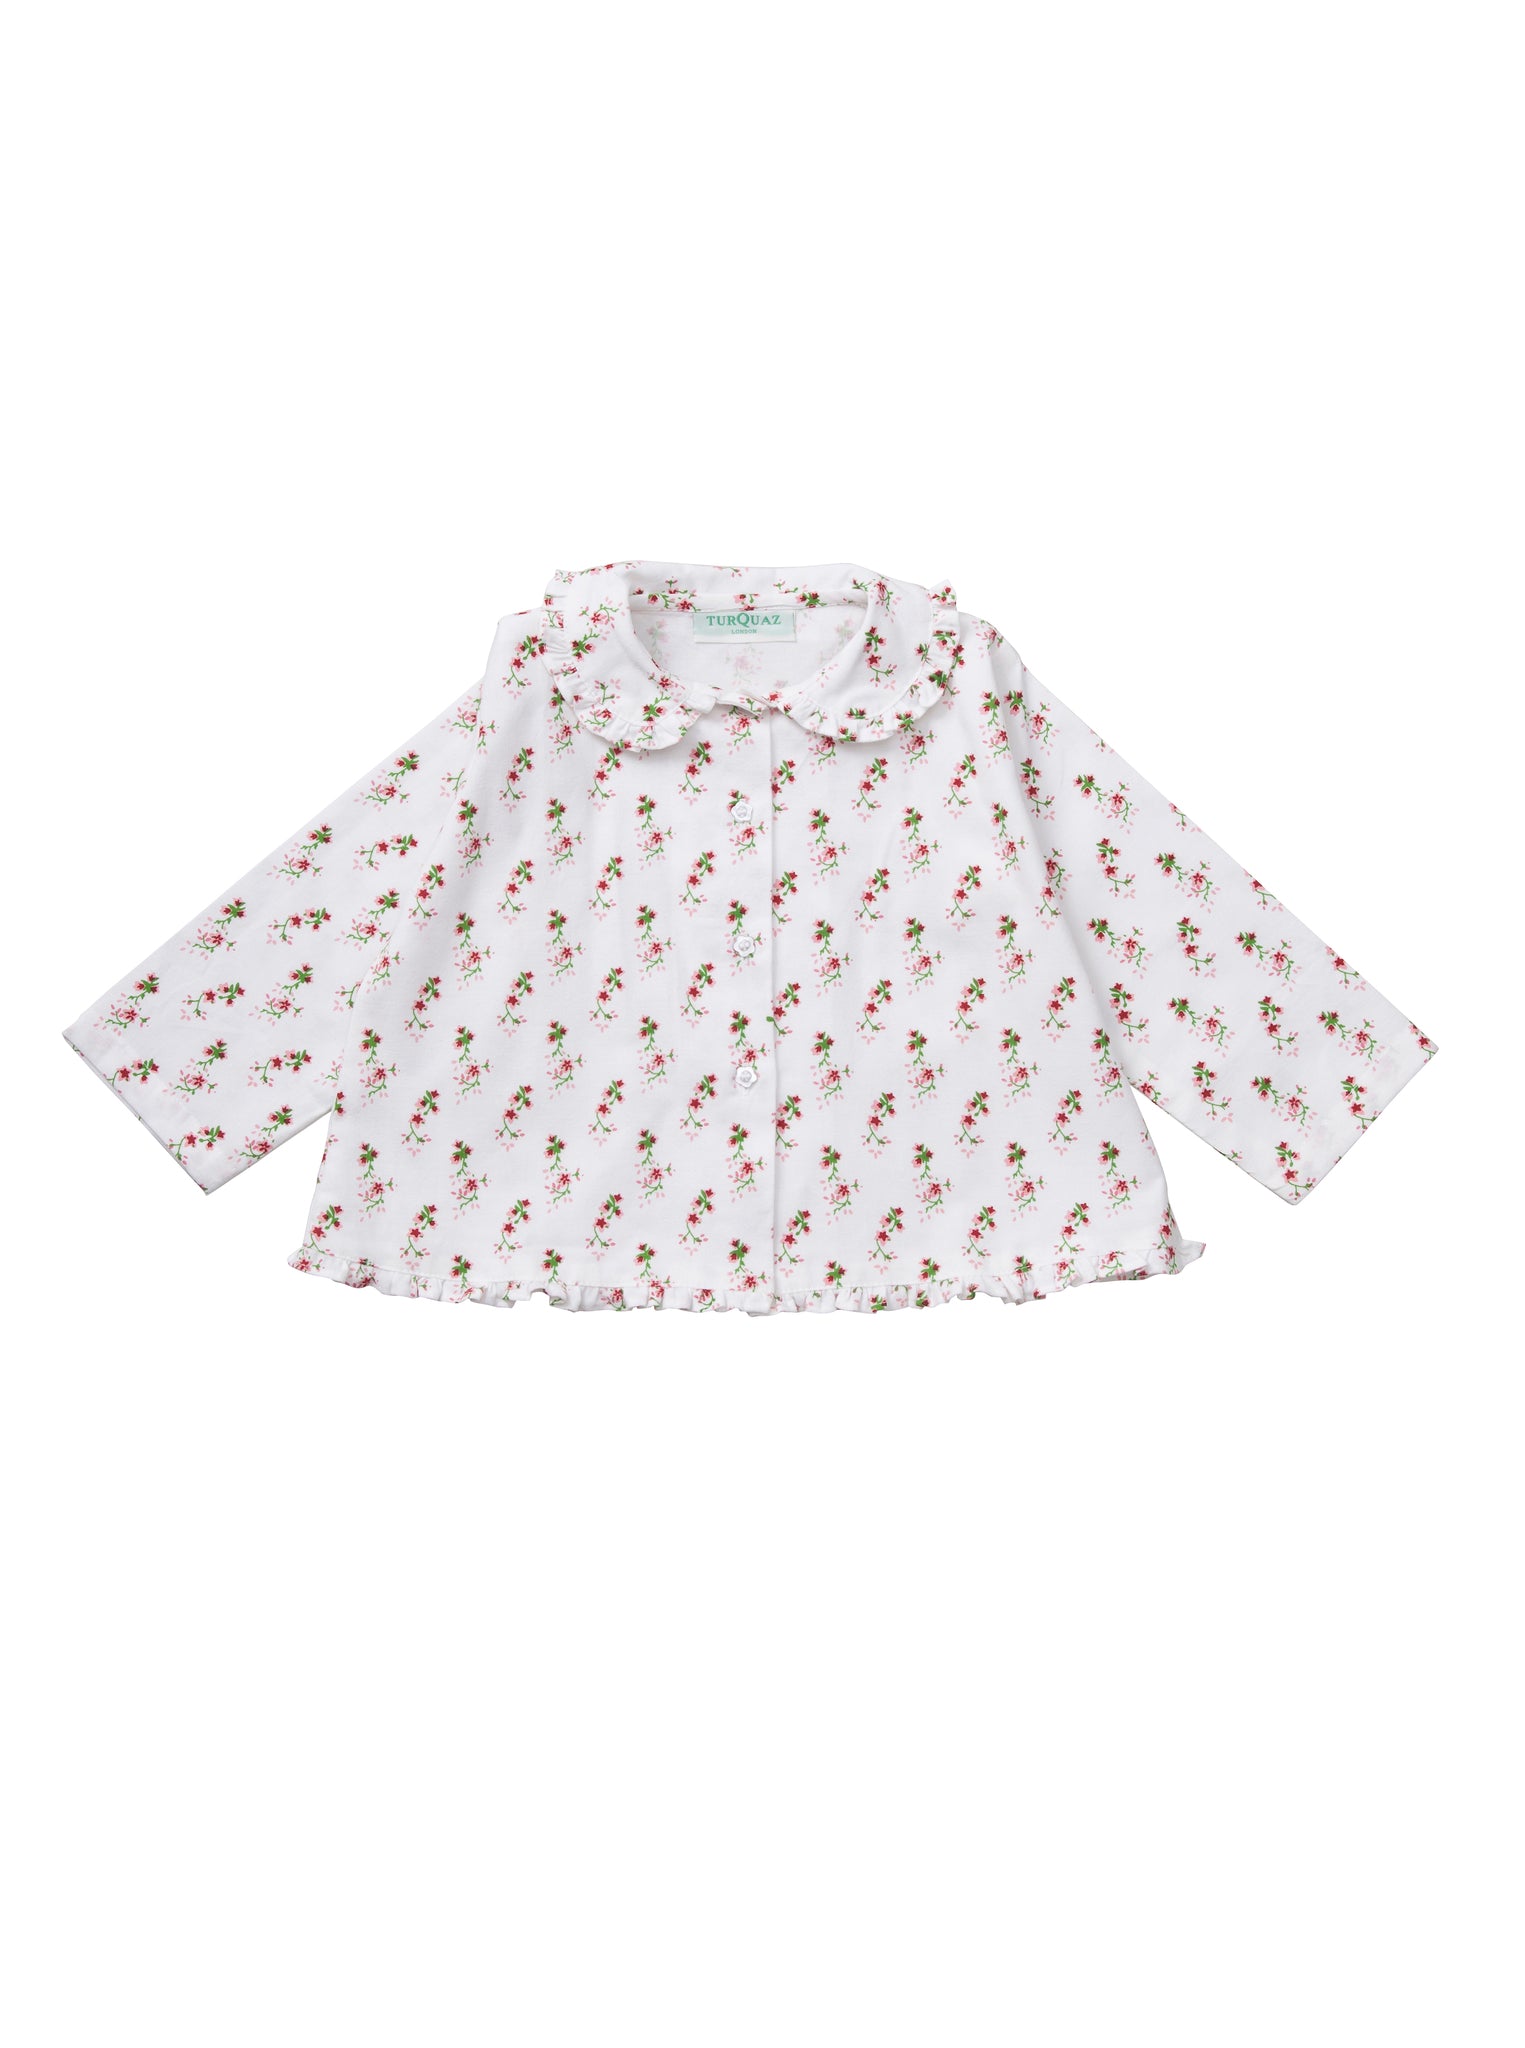 Classic floral print cotton pyjamas for children from Turquaz. Top front.